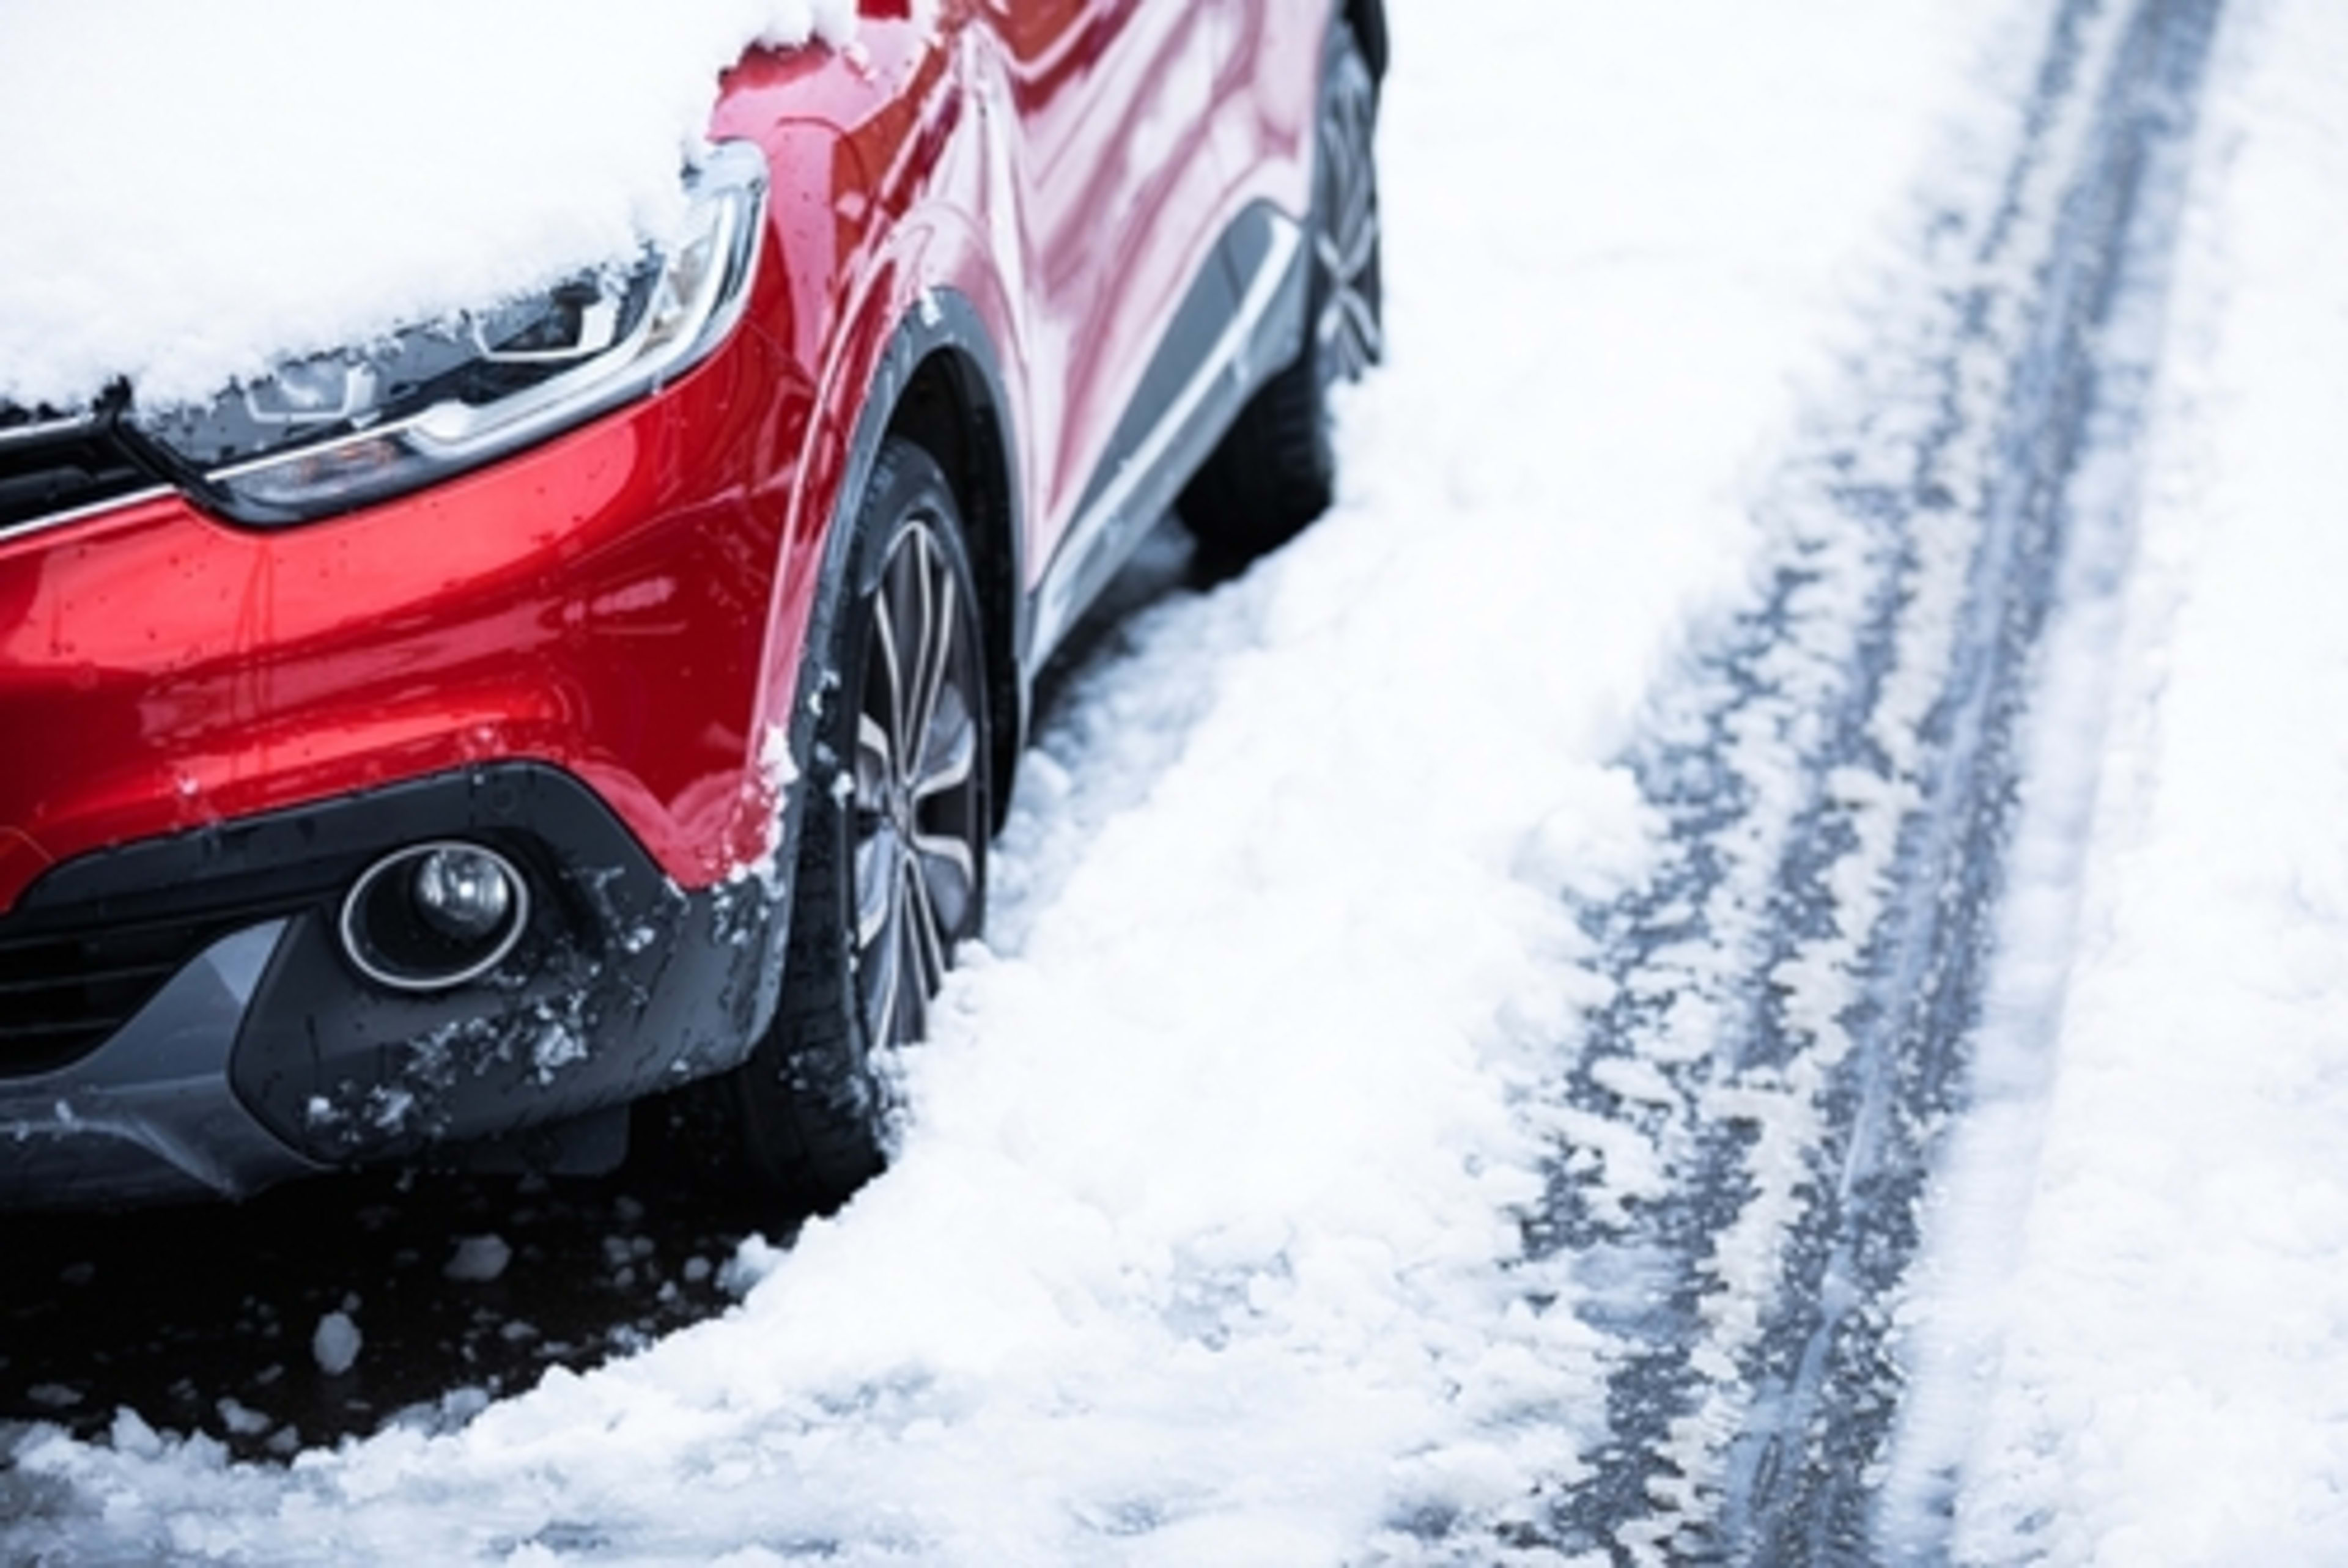 Red vehicle on the side of the road, covered in snow, showing a passing car's tire tread pattern in the snow.